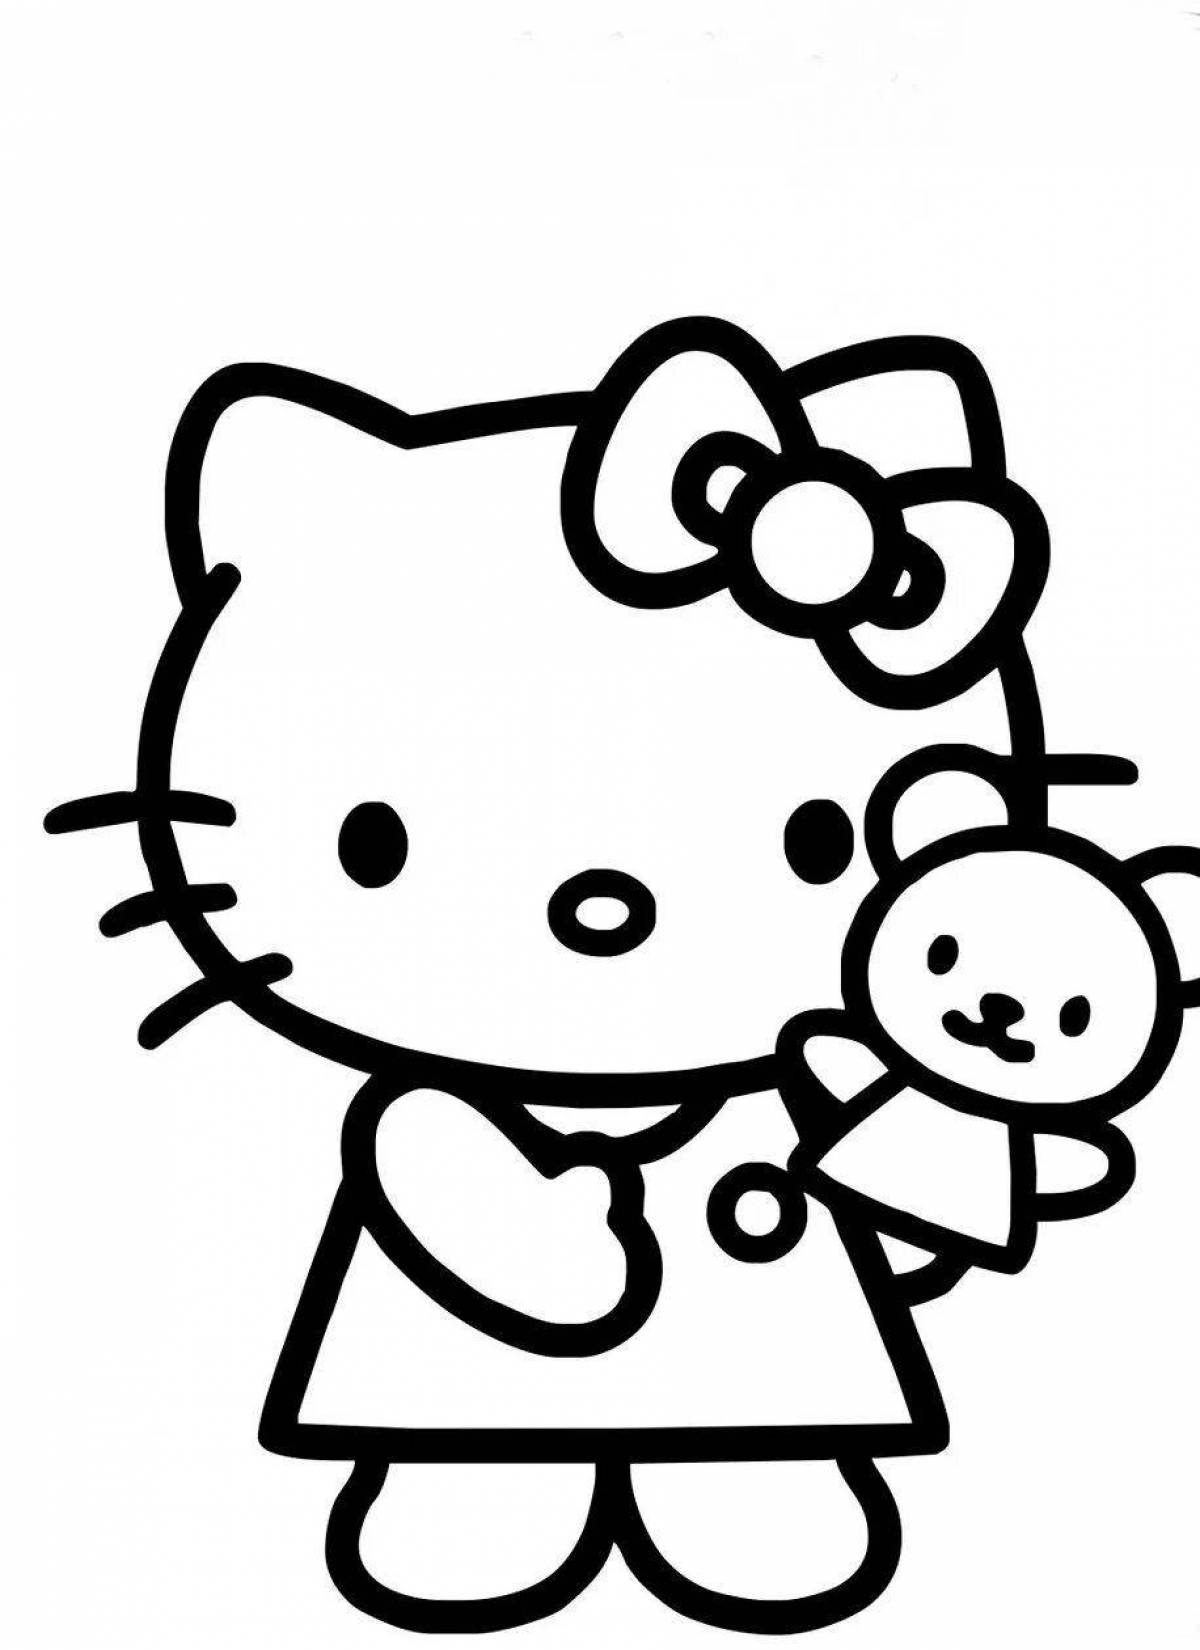 Melody kitty glowing coloring book